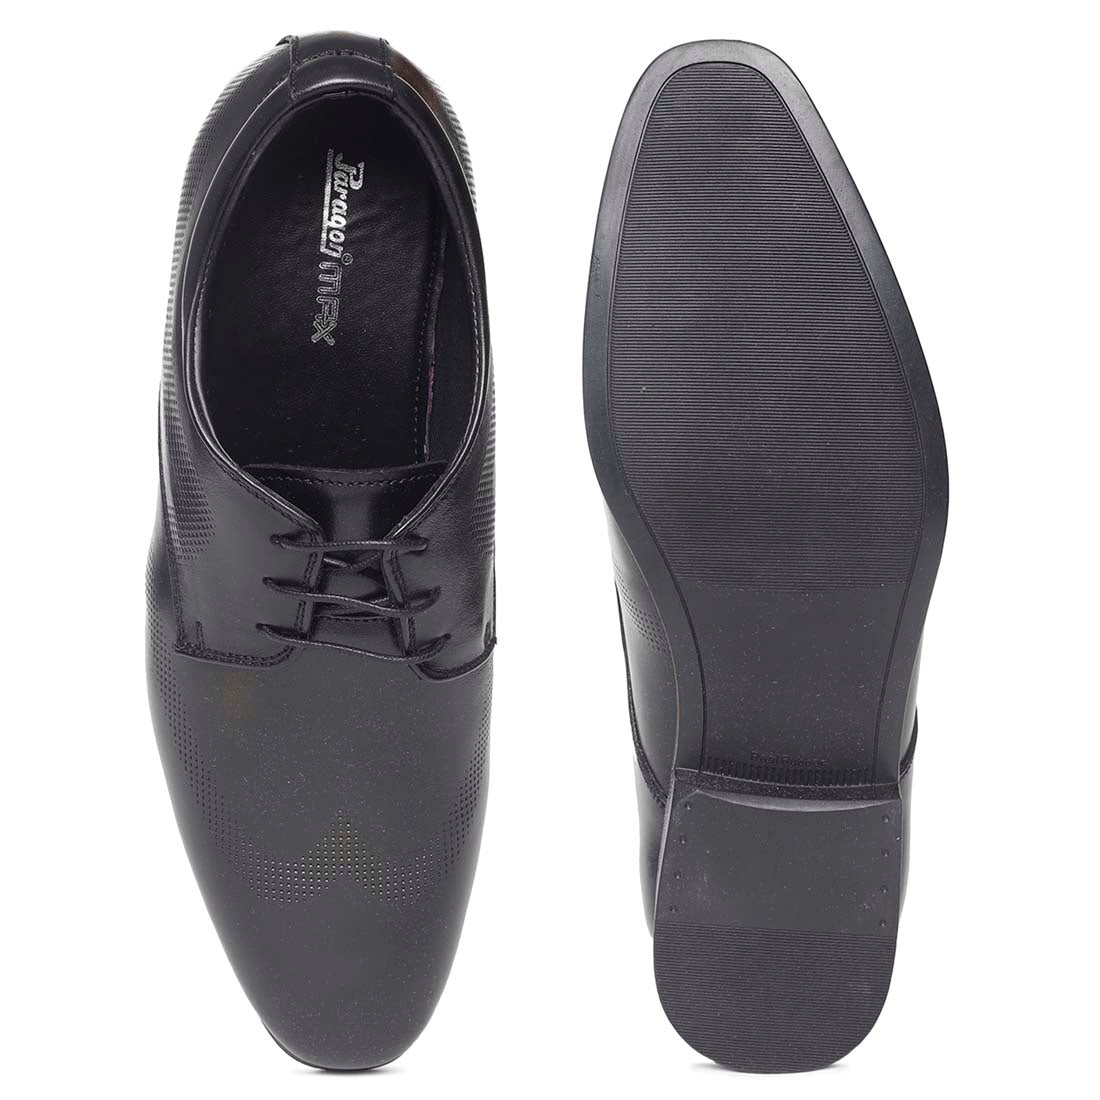 Paragon  RB11222GP Men Formal Shoes | Corporate Office Shoes | Smart &amp; Sleek Design | Comfortable Sole with Cushioning | For Daily &amp; Occasion Wear